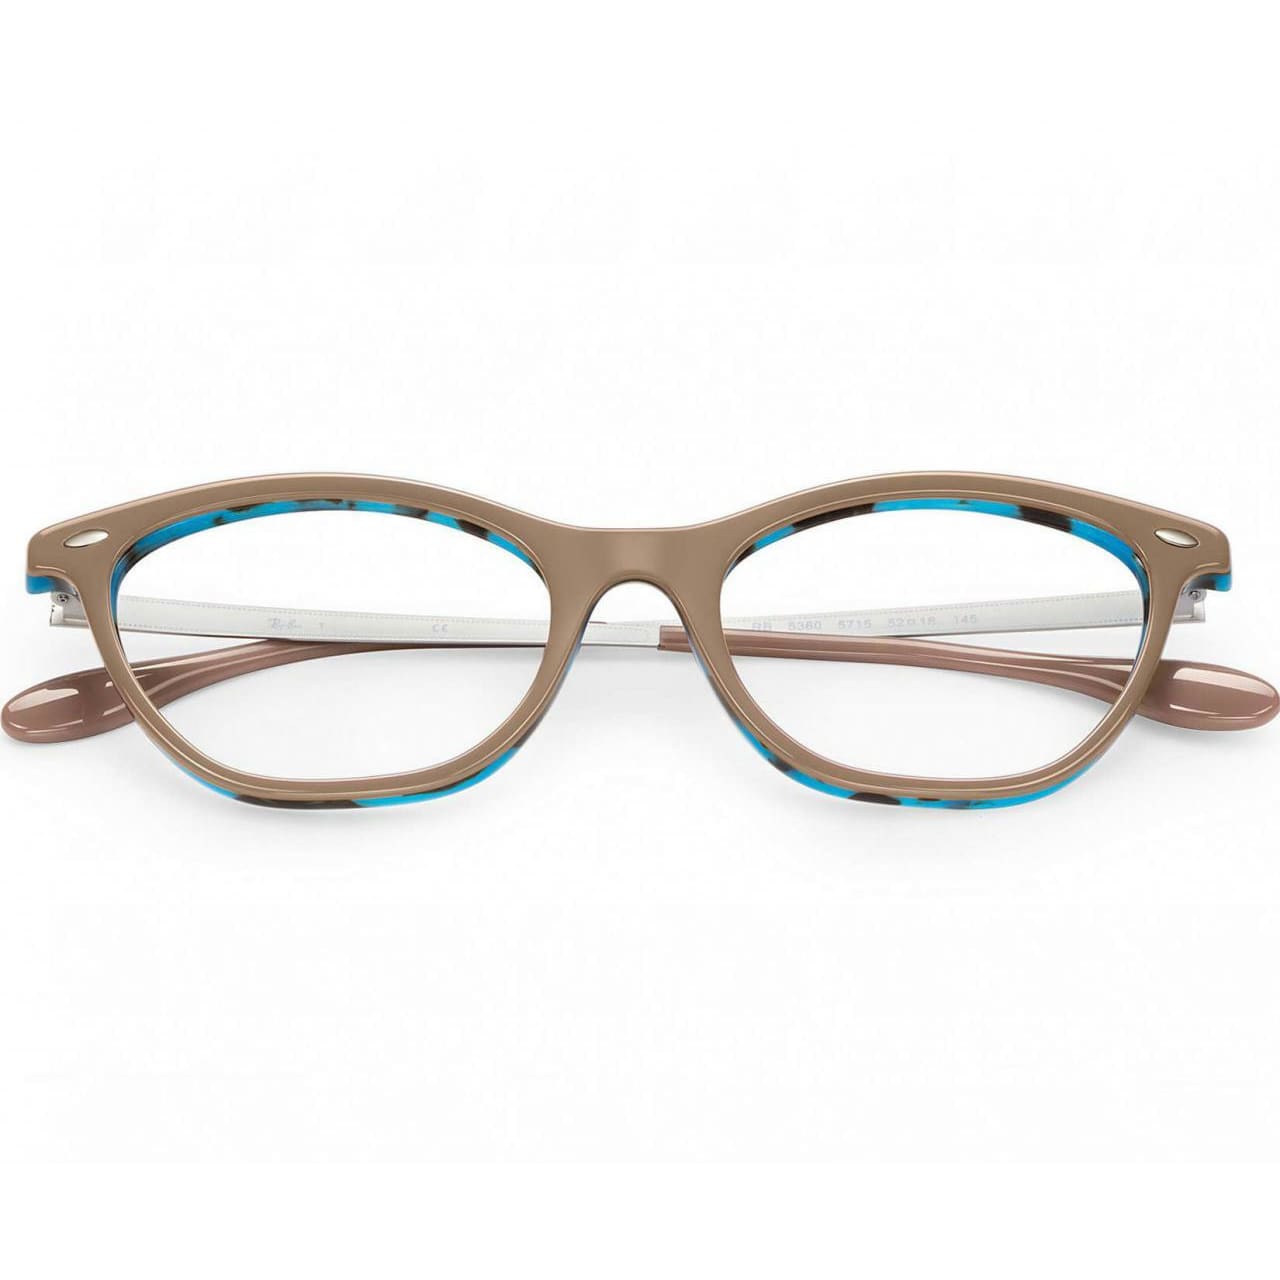 Ray-Ban RB5360 5715 Light Brown with Blue Silver Full Rim Square Eyeglasses Frames 8053672770131